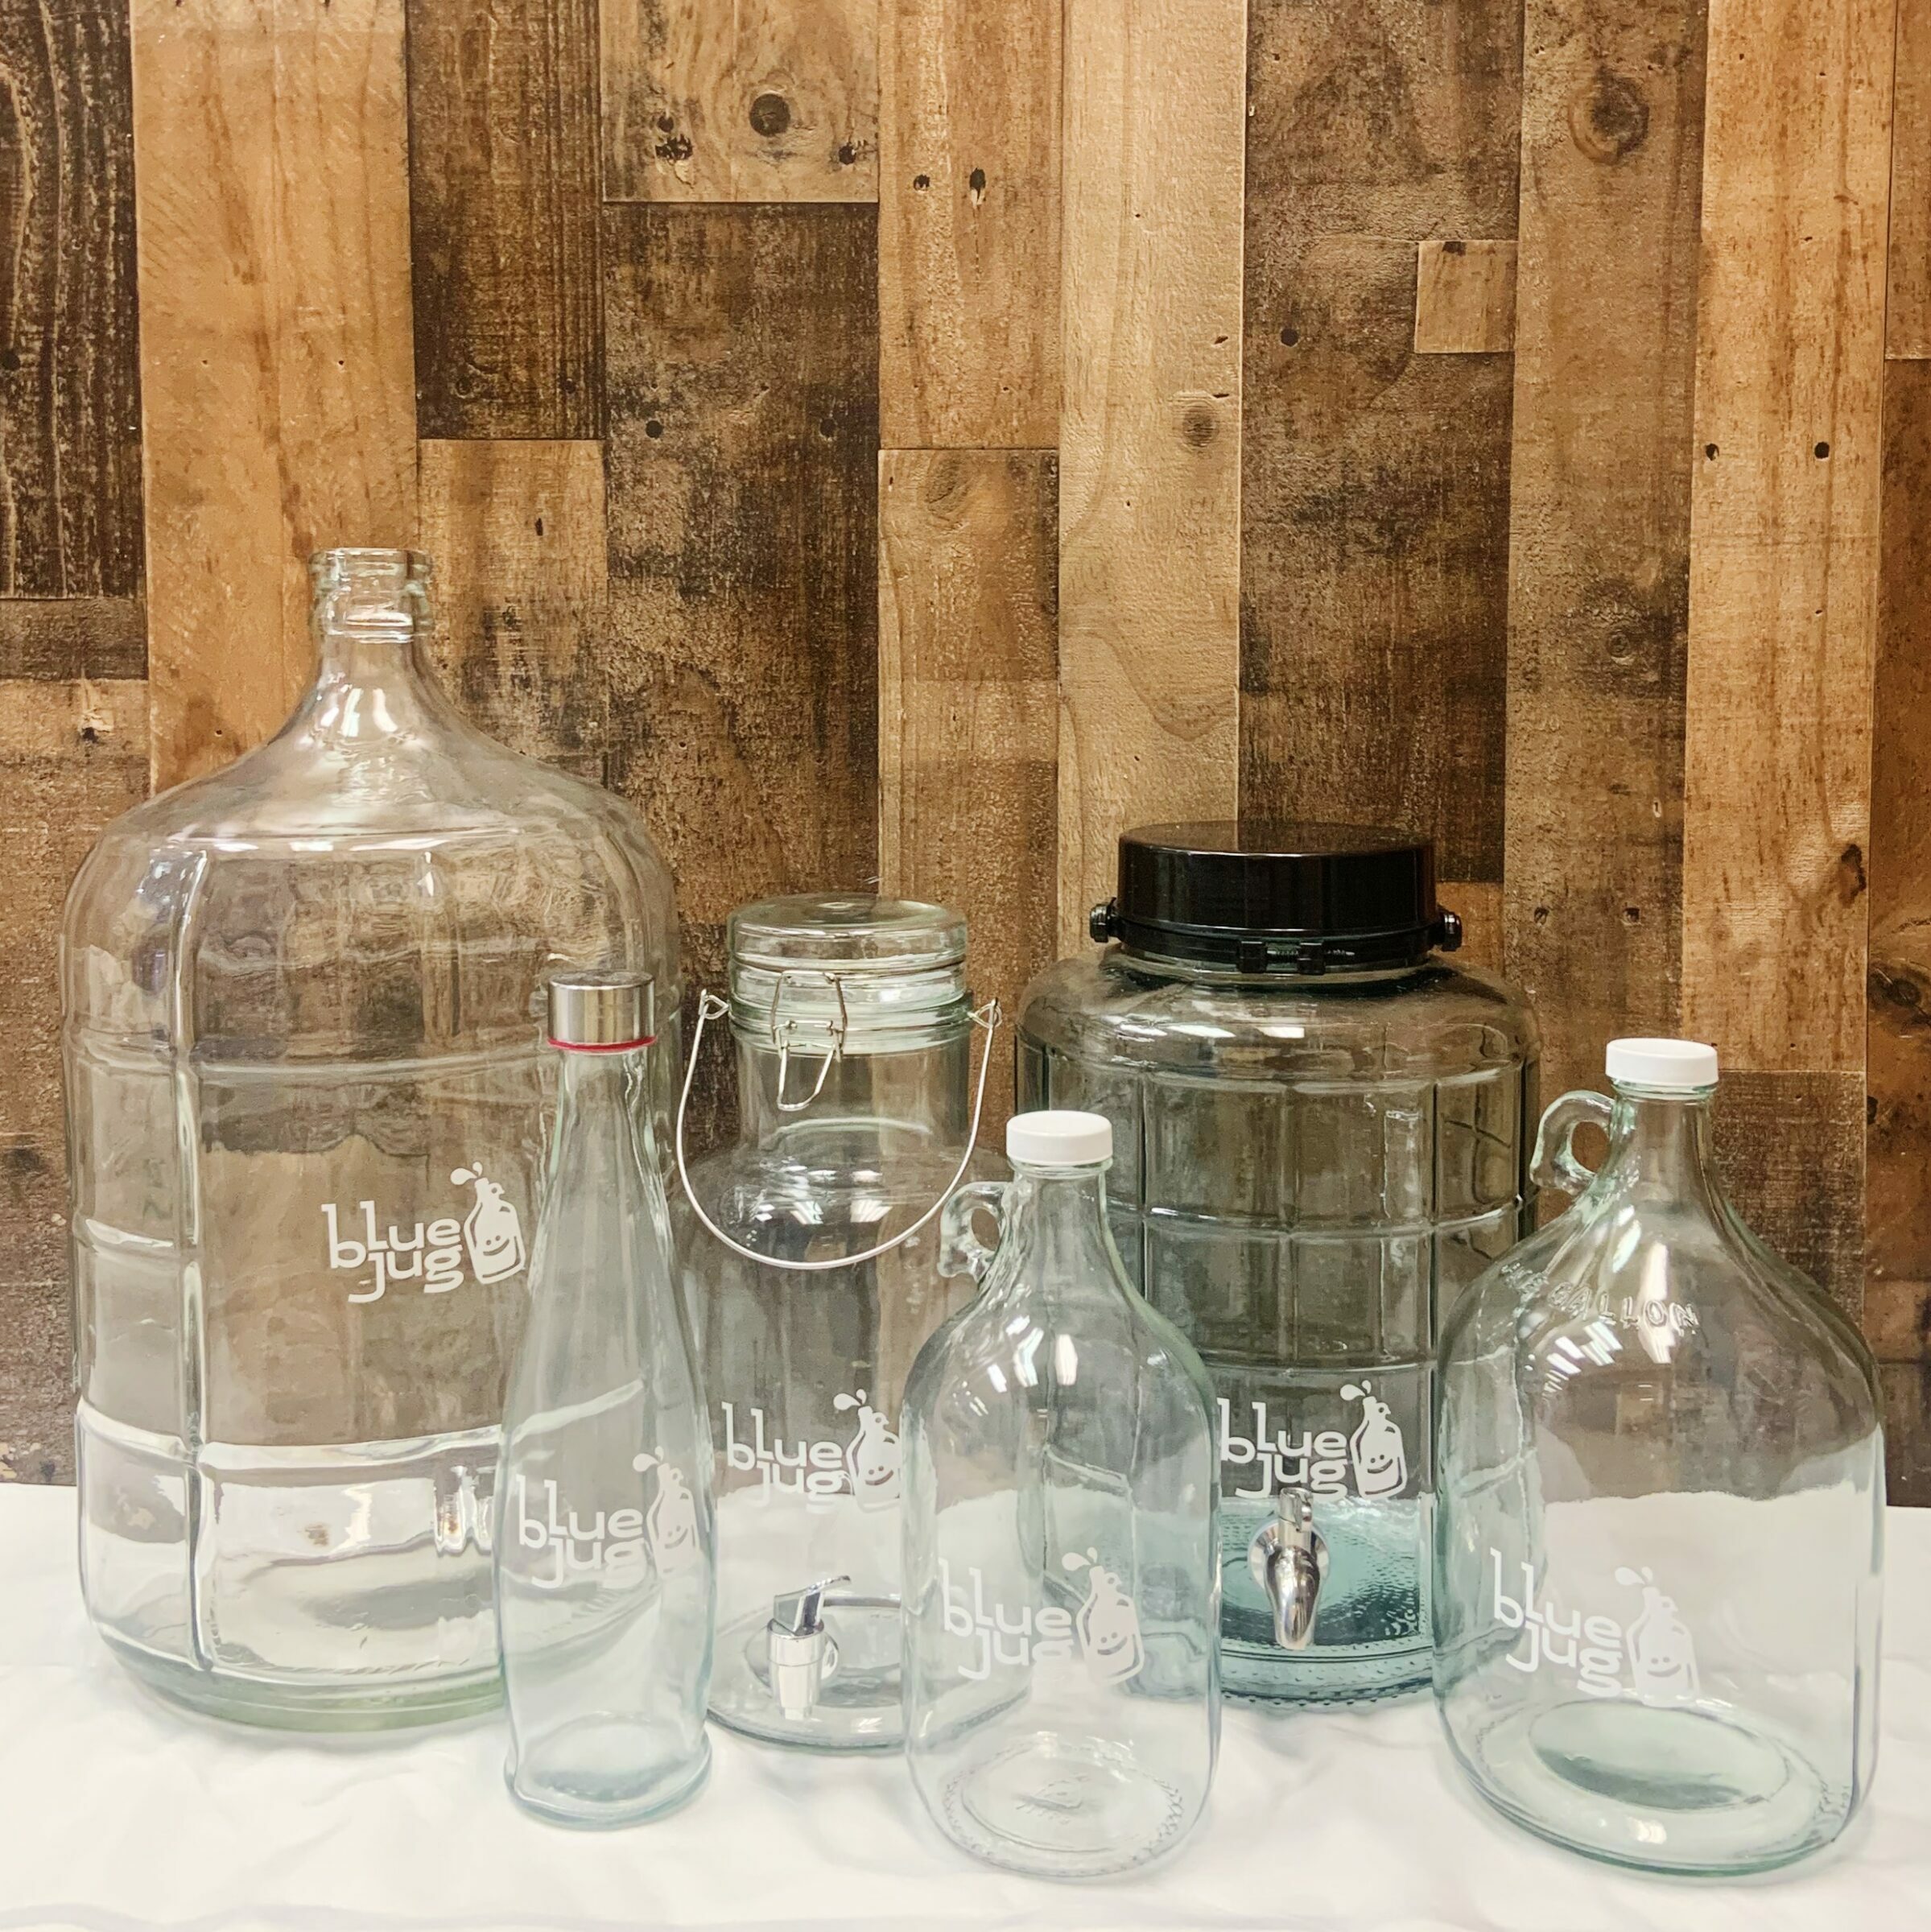 Glass jars with a distinctive blue jug logo imprinted on them, adding a touch of branding and style to the containers